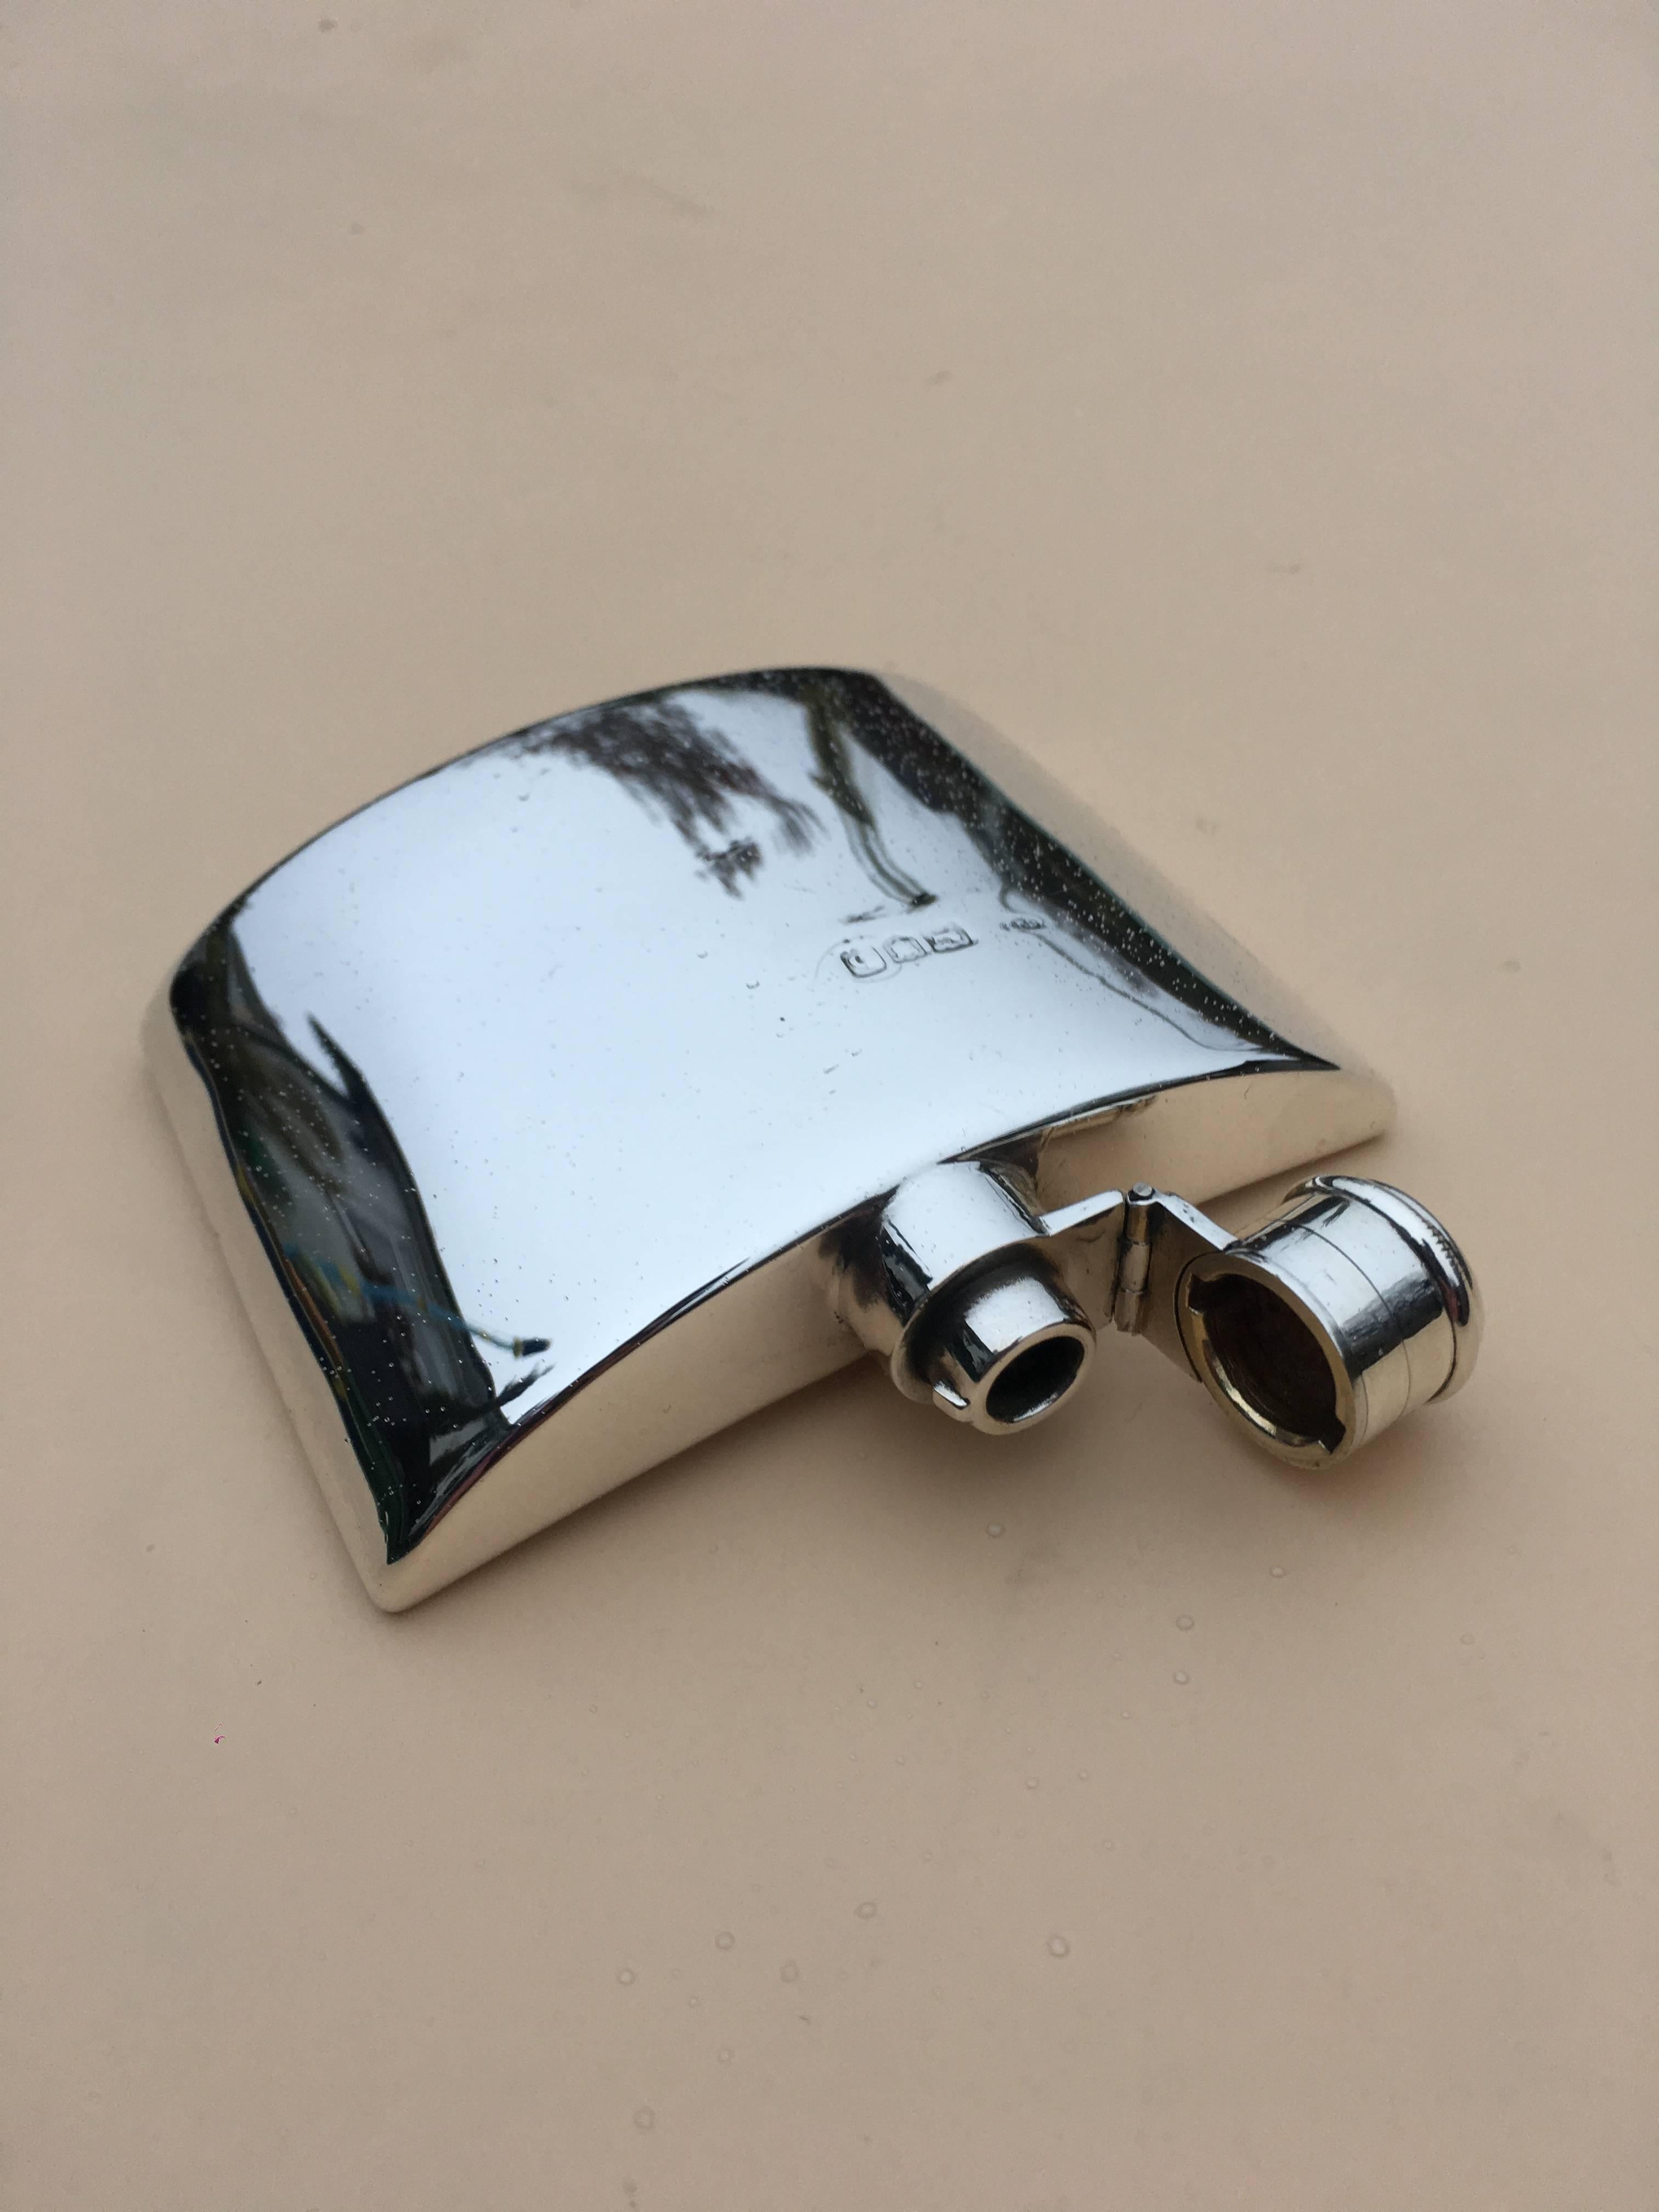 Victorian silver hip flask by Charles Fox & Co Ltd date 1897.

This small hip flask has a lovely curve to one side making it a very neat fit in any pocket, the flask has a hinged lid with turning grip. The flask is made by “ Charles Fox & Co